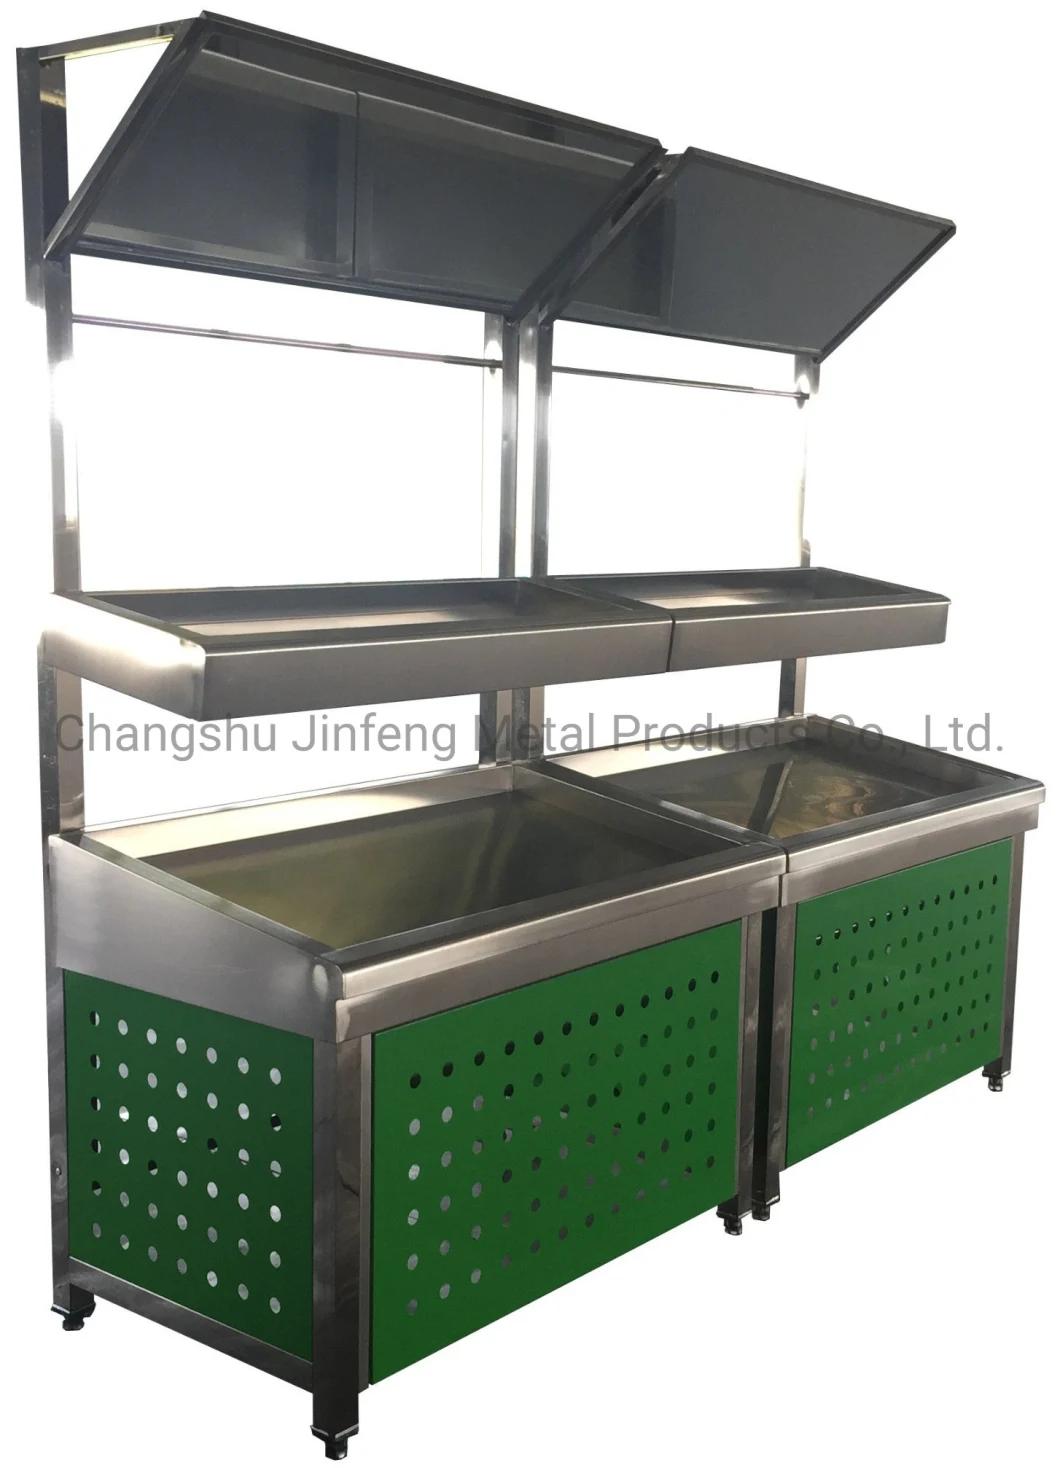 Supermarket Double Layers Display Stand Store Fruit and Vegetable Shelve